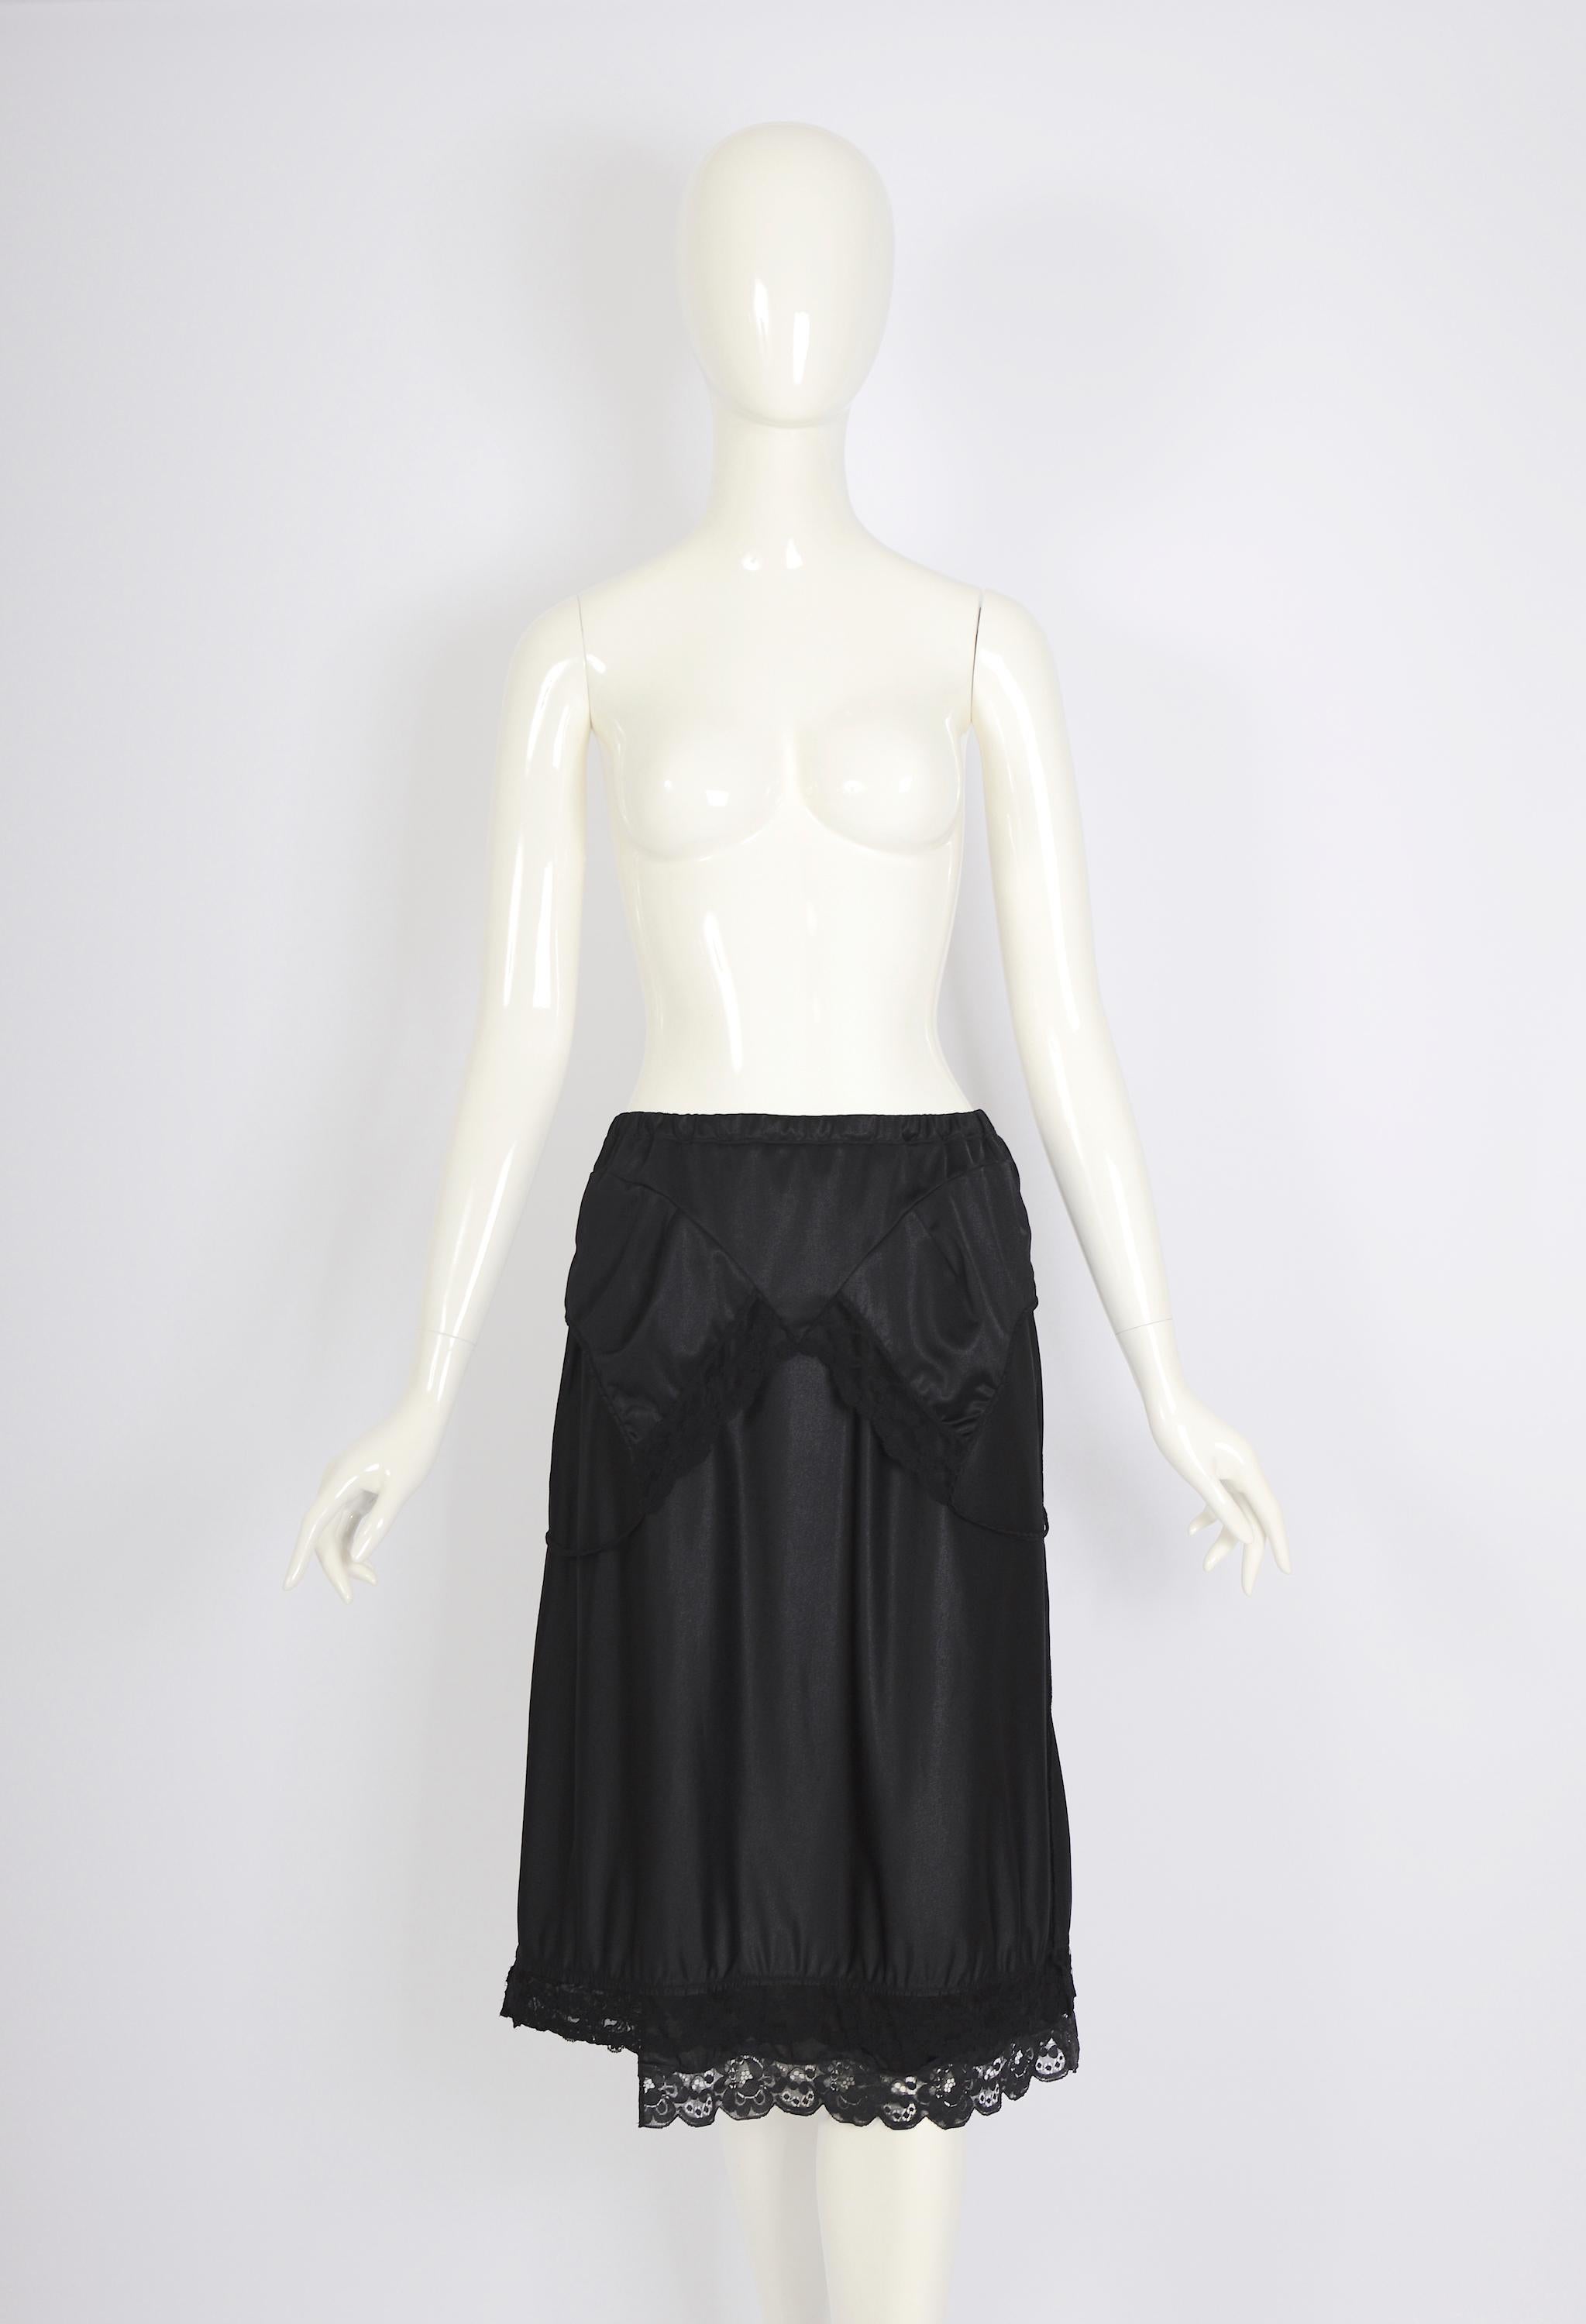 Iconic collectors investment piece by Martin Margiela. Vintage artisanal collection Martin Margiela spring-summer 2003 black polyester lingerie dress reconstructed skilfully into a skirt. This is the short version of the one seen on the runway. 
The